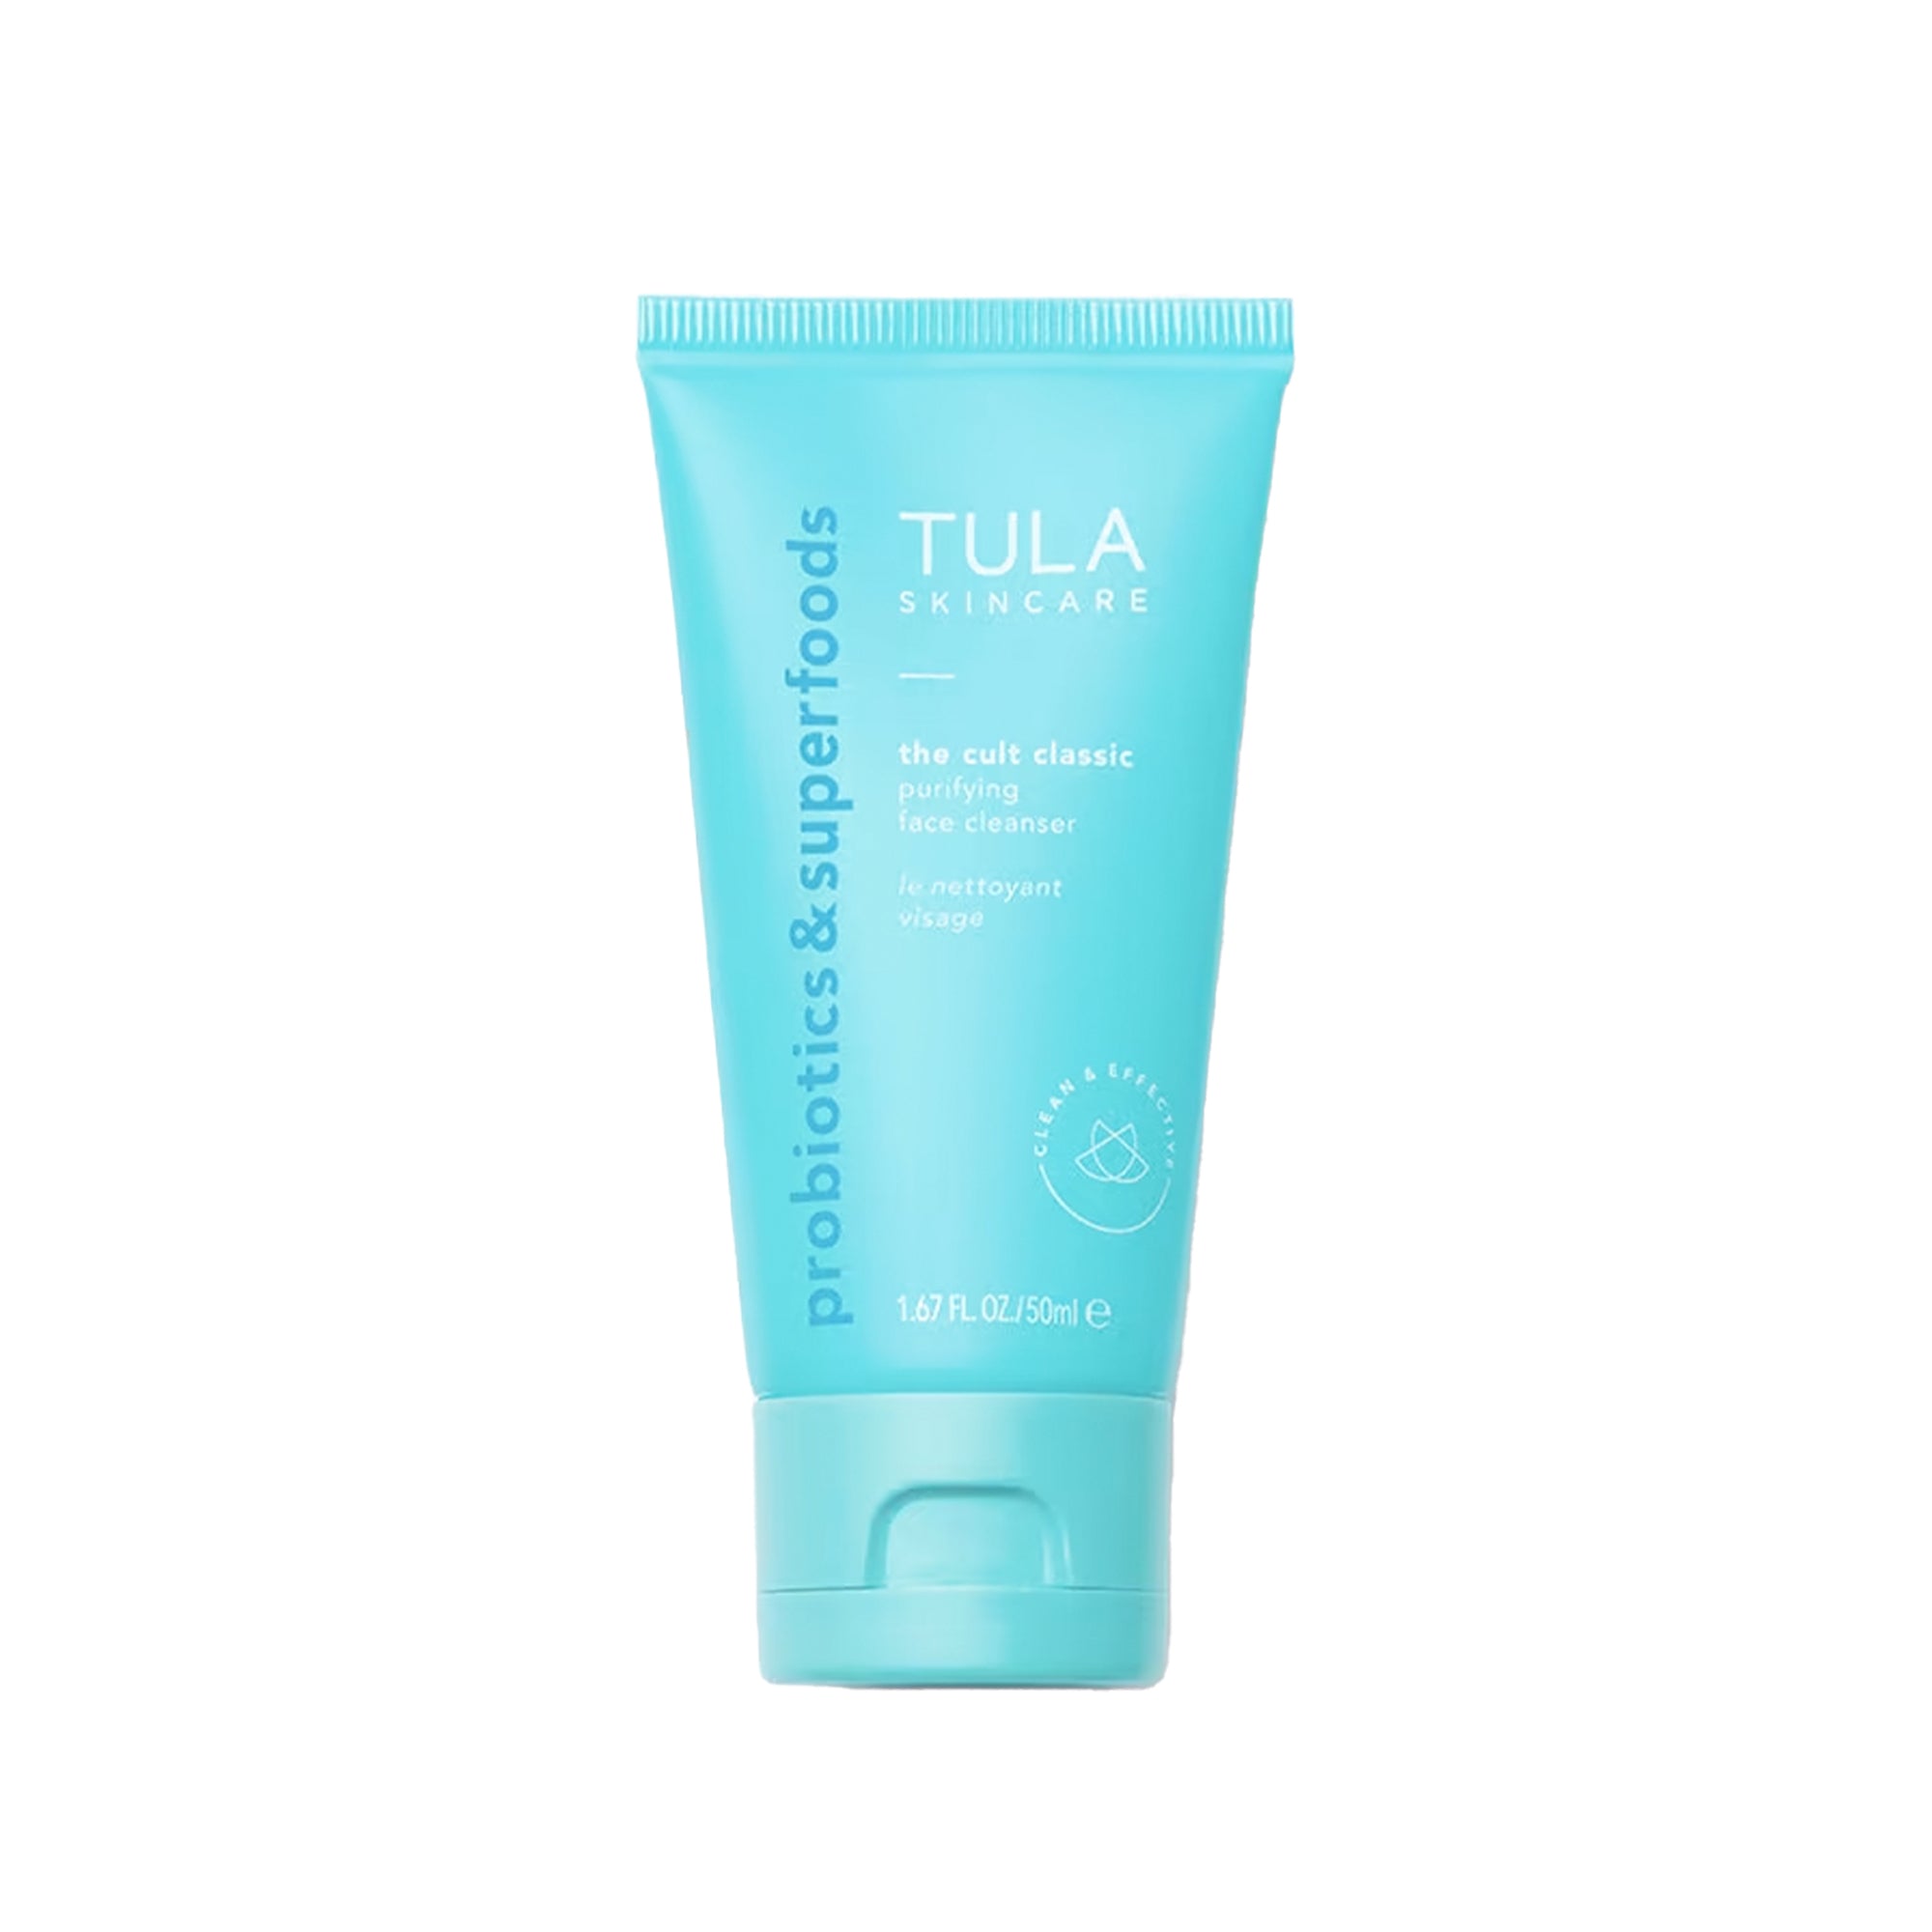 TULA Skincare the cult classic purifying face cleanser, 1.67 oz